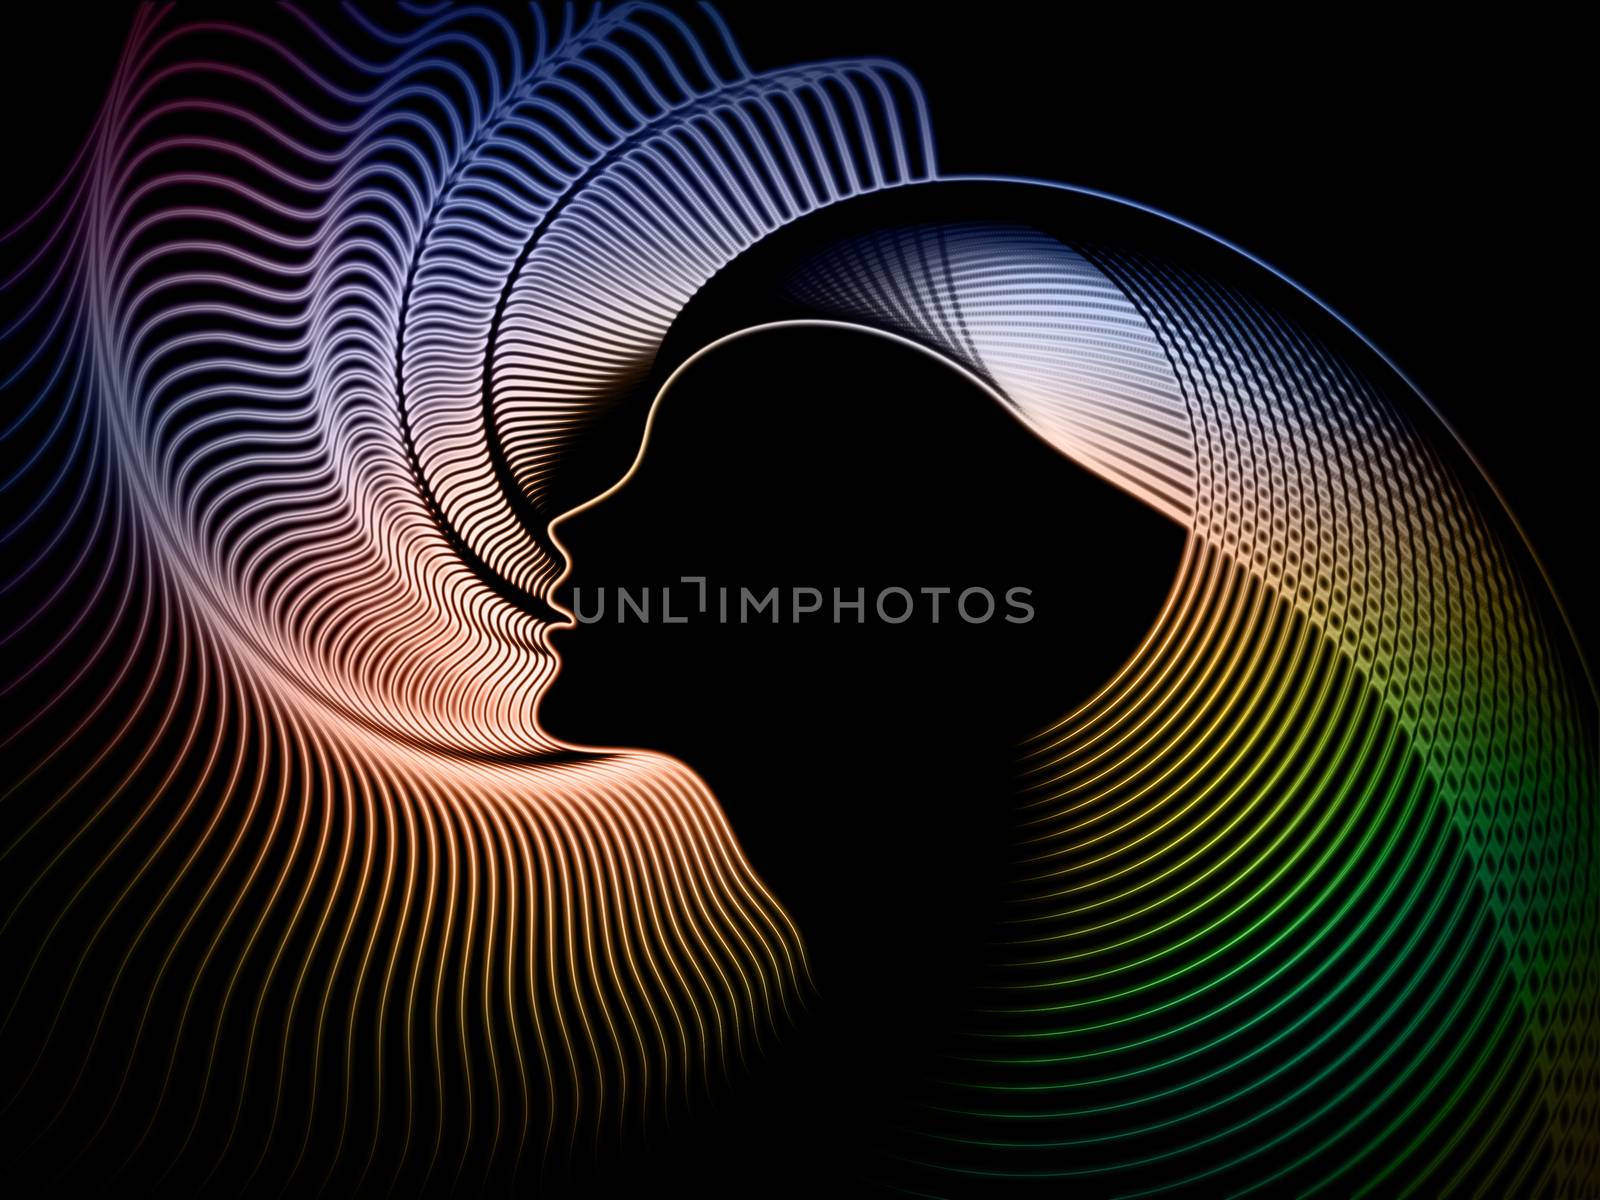 Geometry of Soul series. Abstract arrangement of profile lines of human head suitable as background for projects on education, science, technology and graphic design